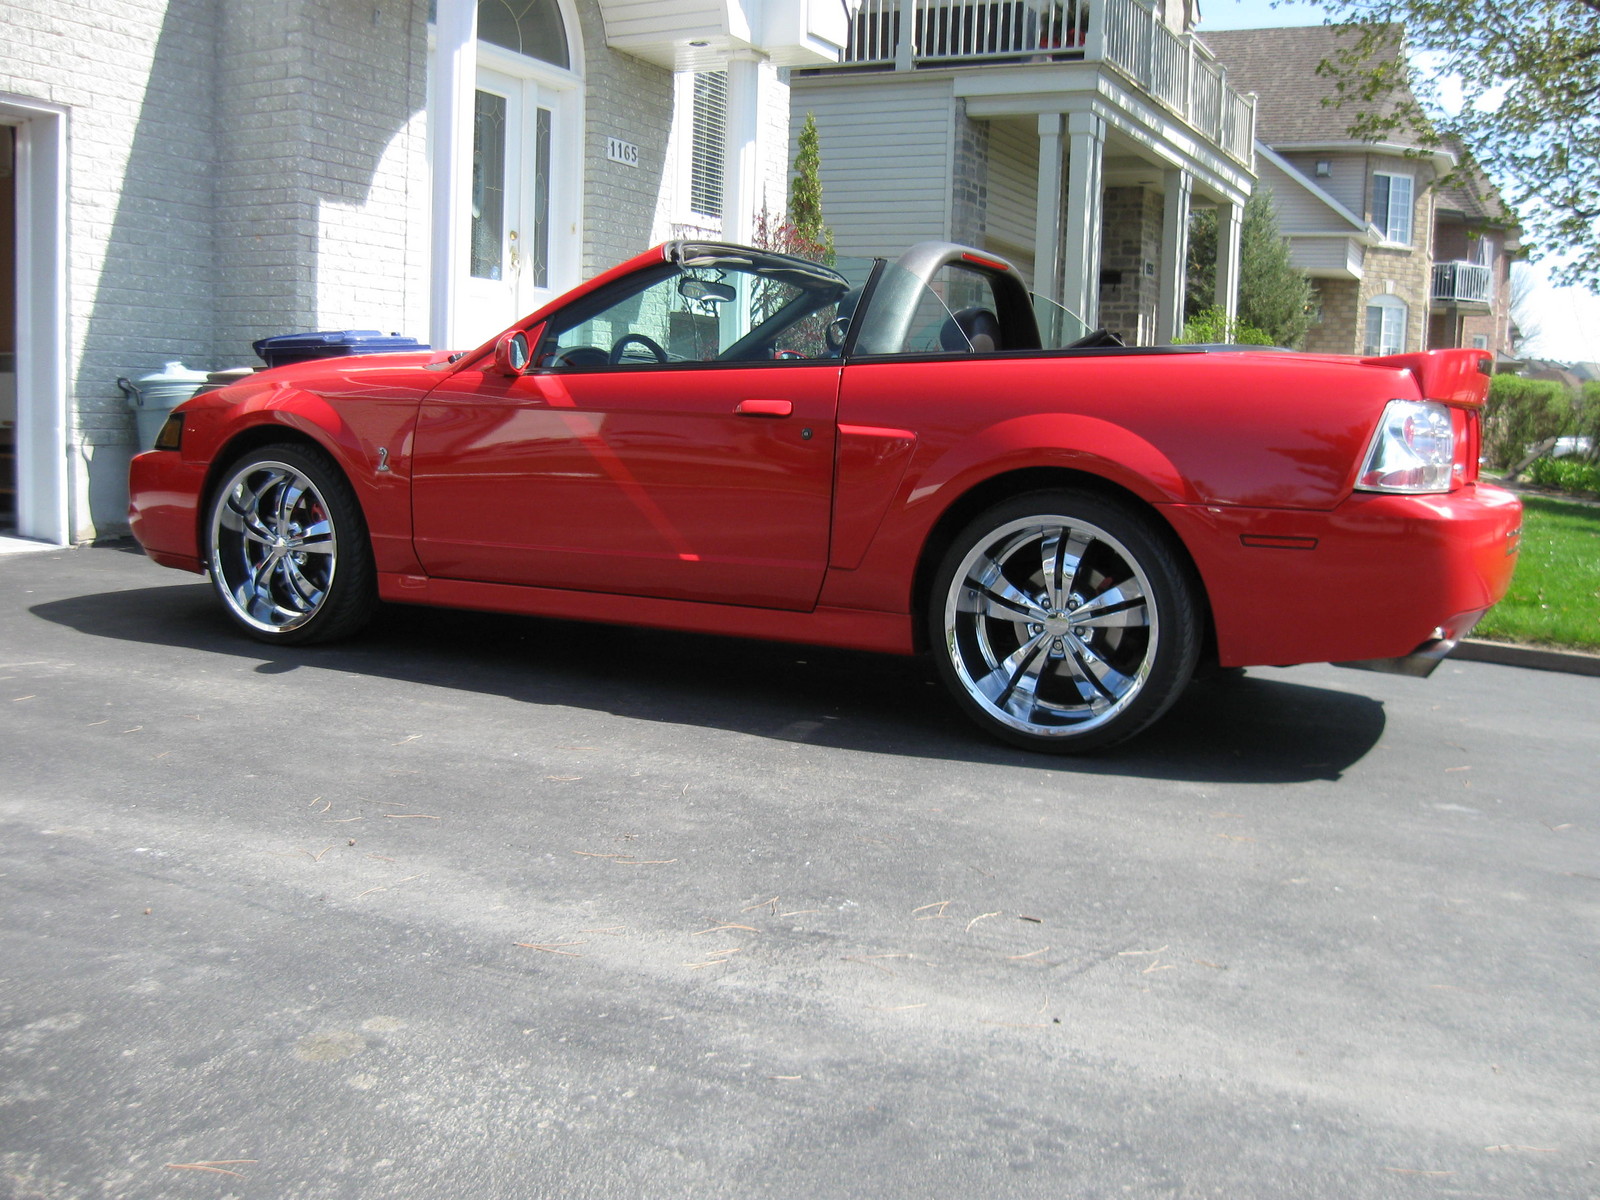 2003 red Ford Mustang Cobra picture, mods, upgrades